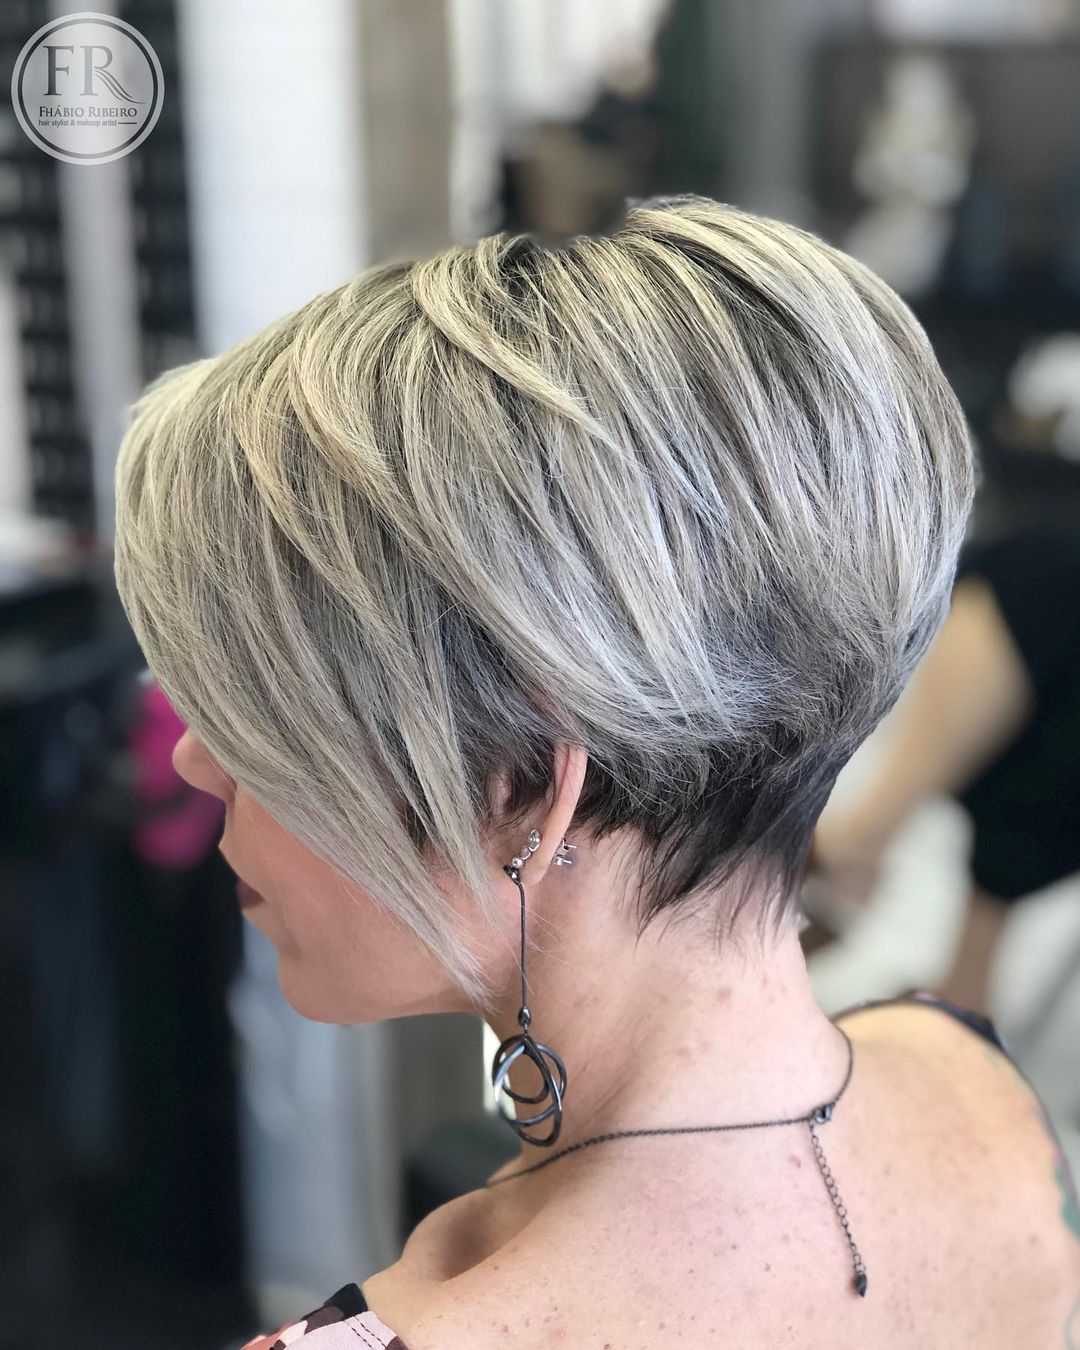 On-Trend Textured Cut for Very Short Thick Hair